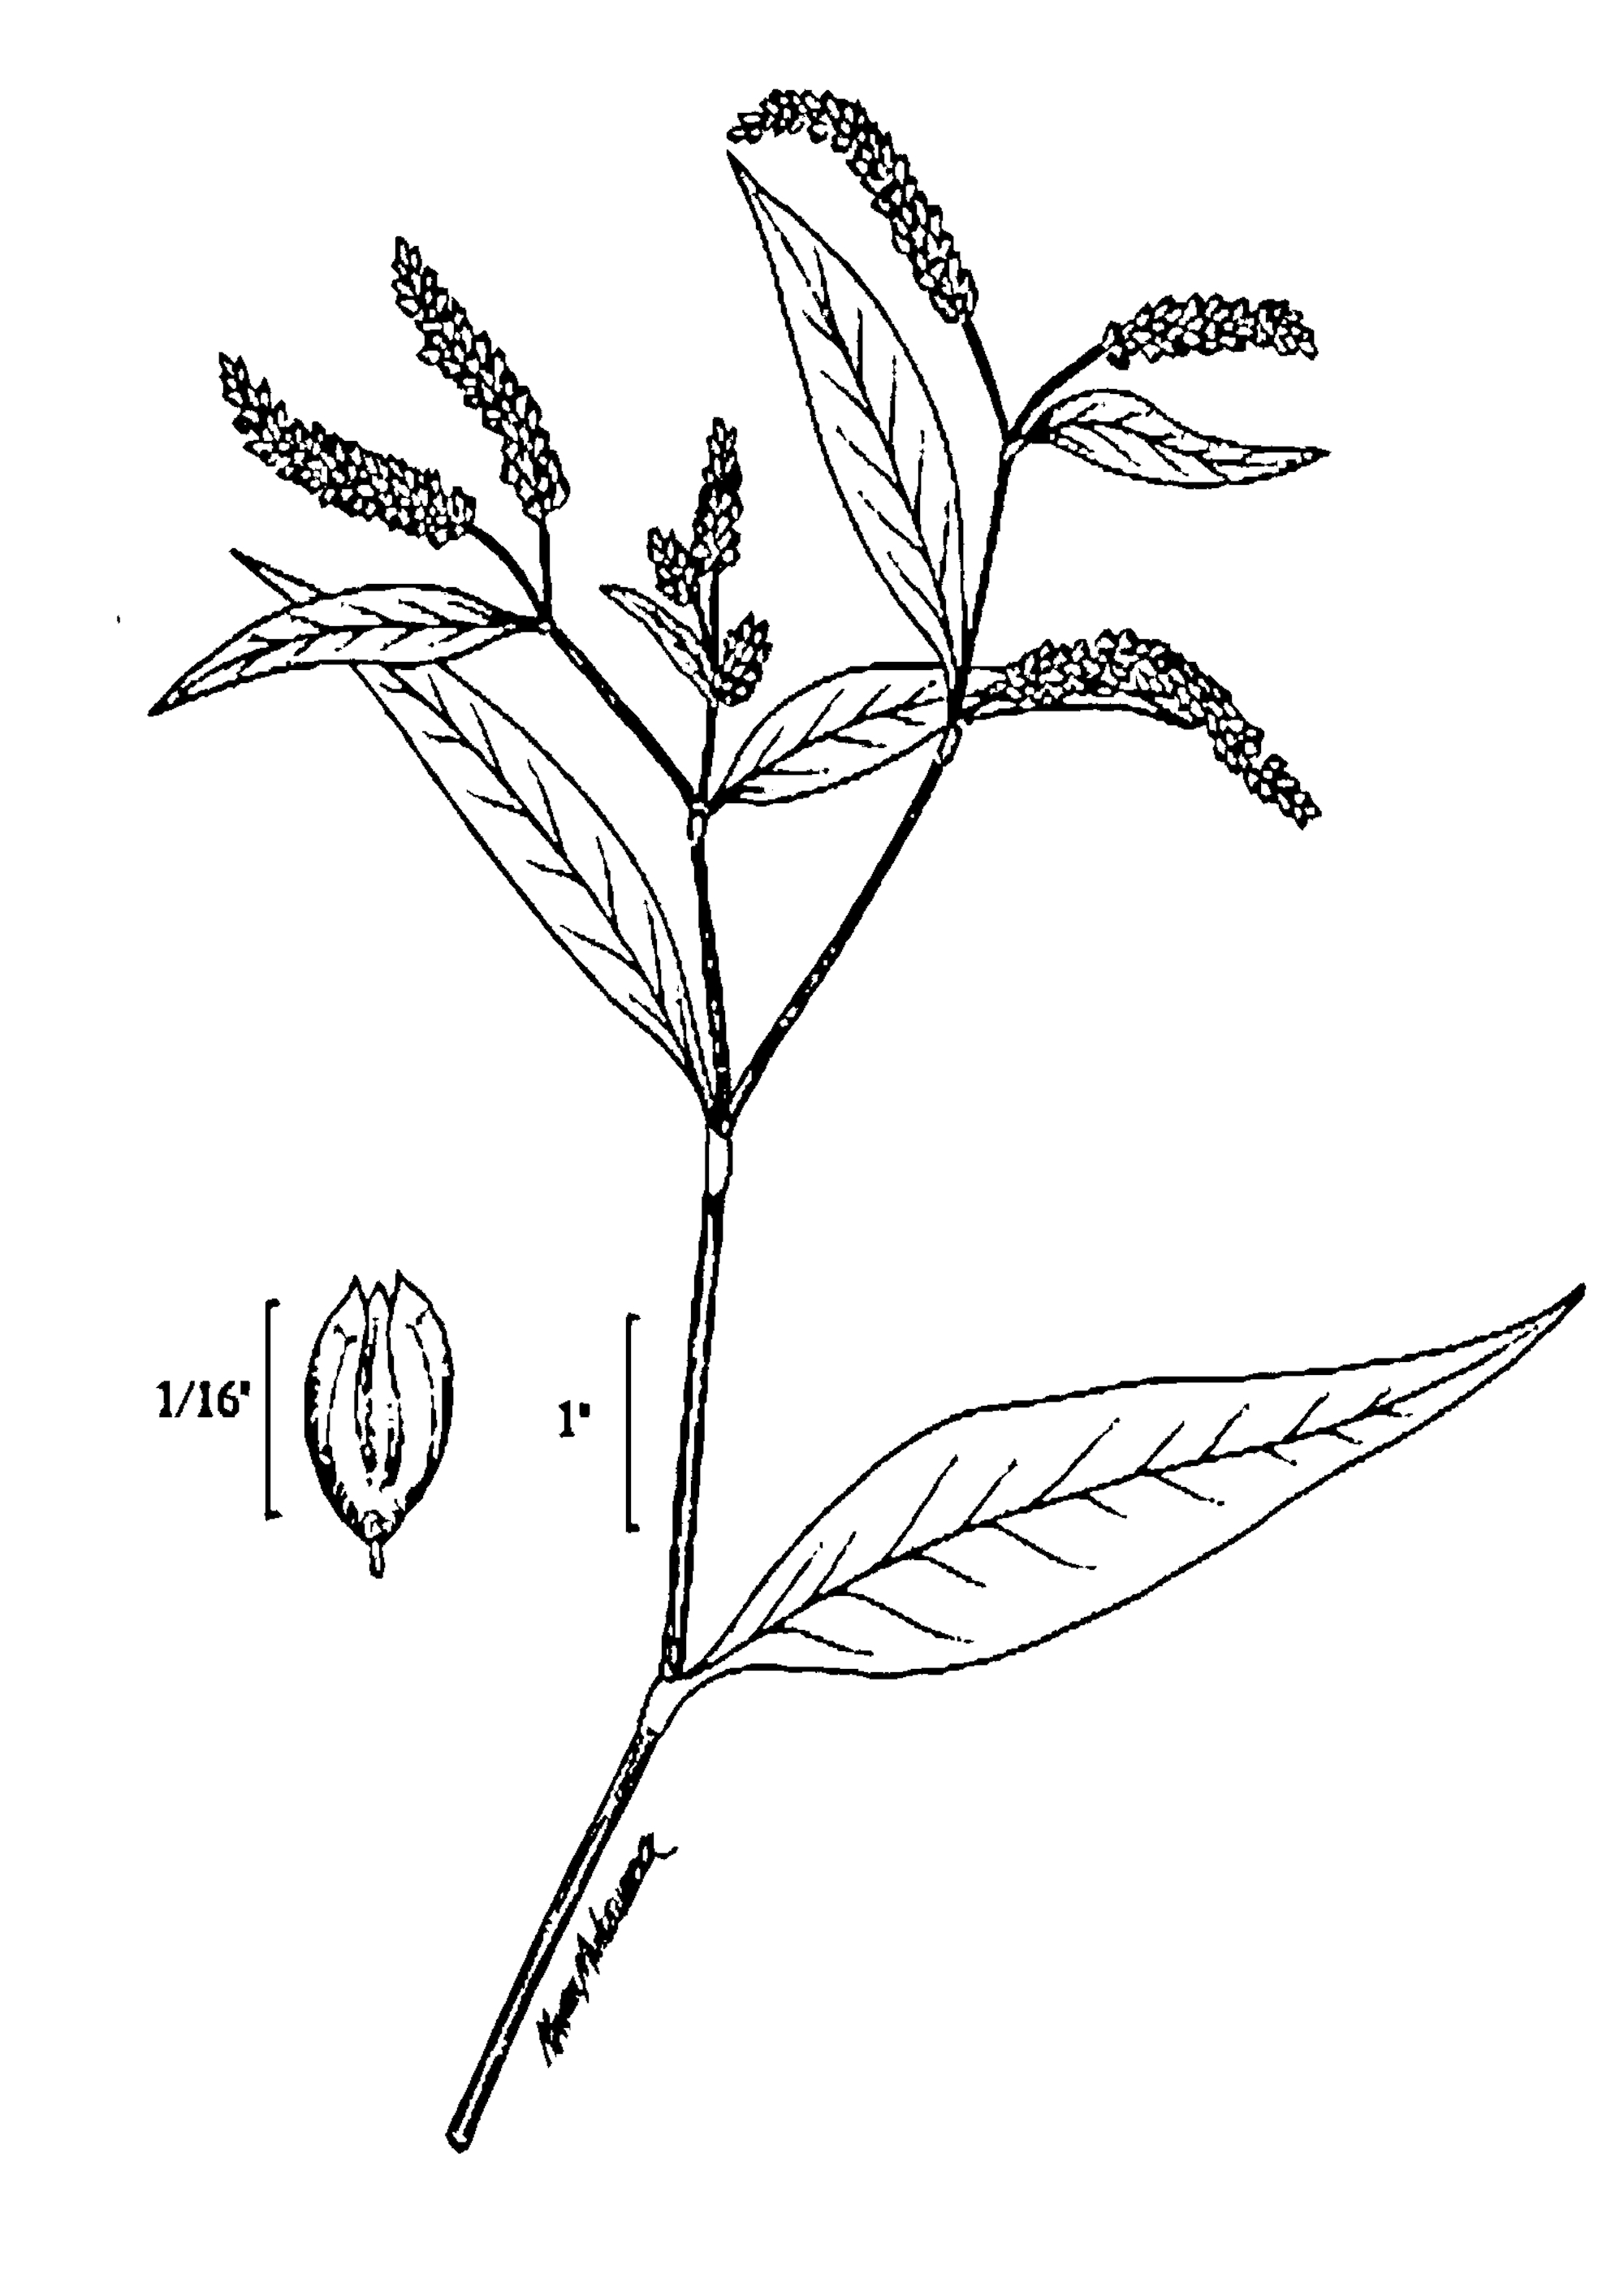 Nodding Smartweed line drawing from USDA  NRCS, Wetland flora: Field office illustrated guide to plant species.